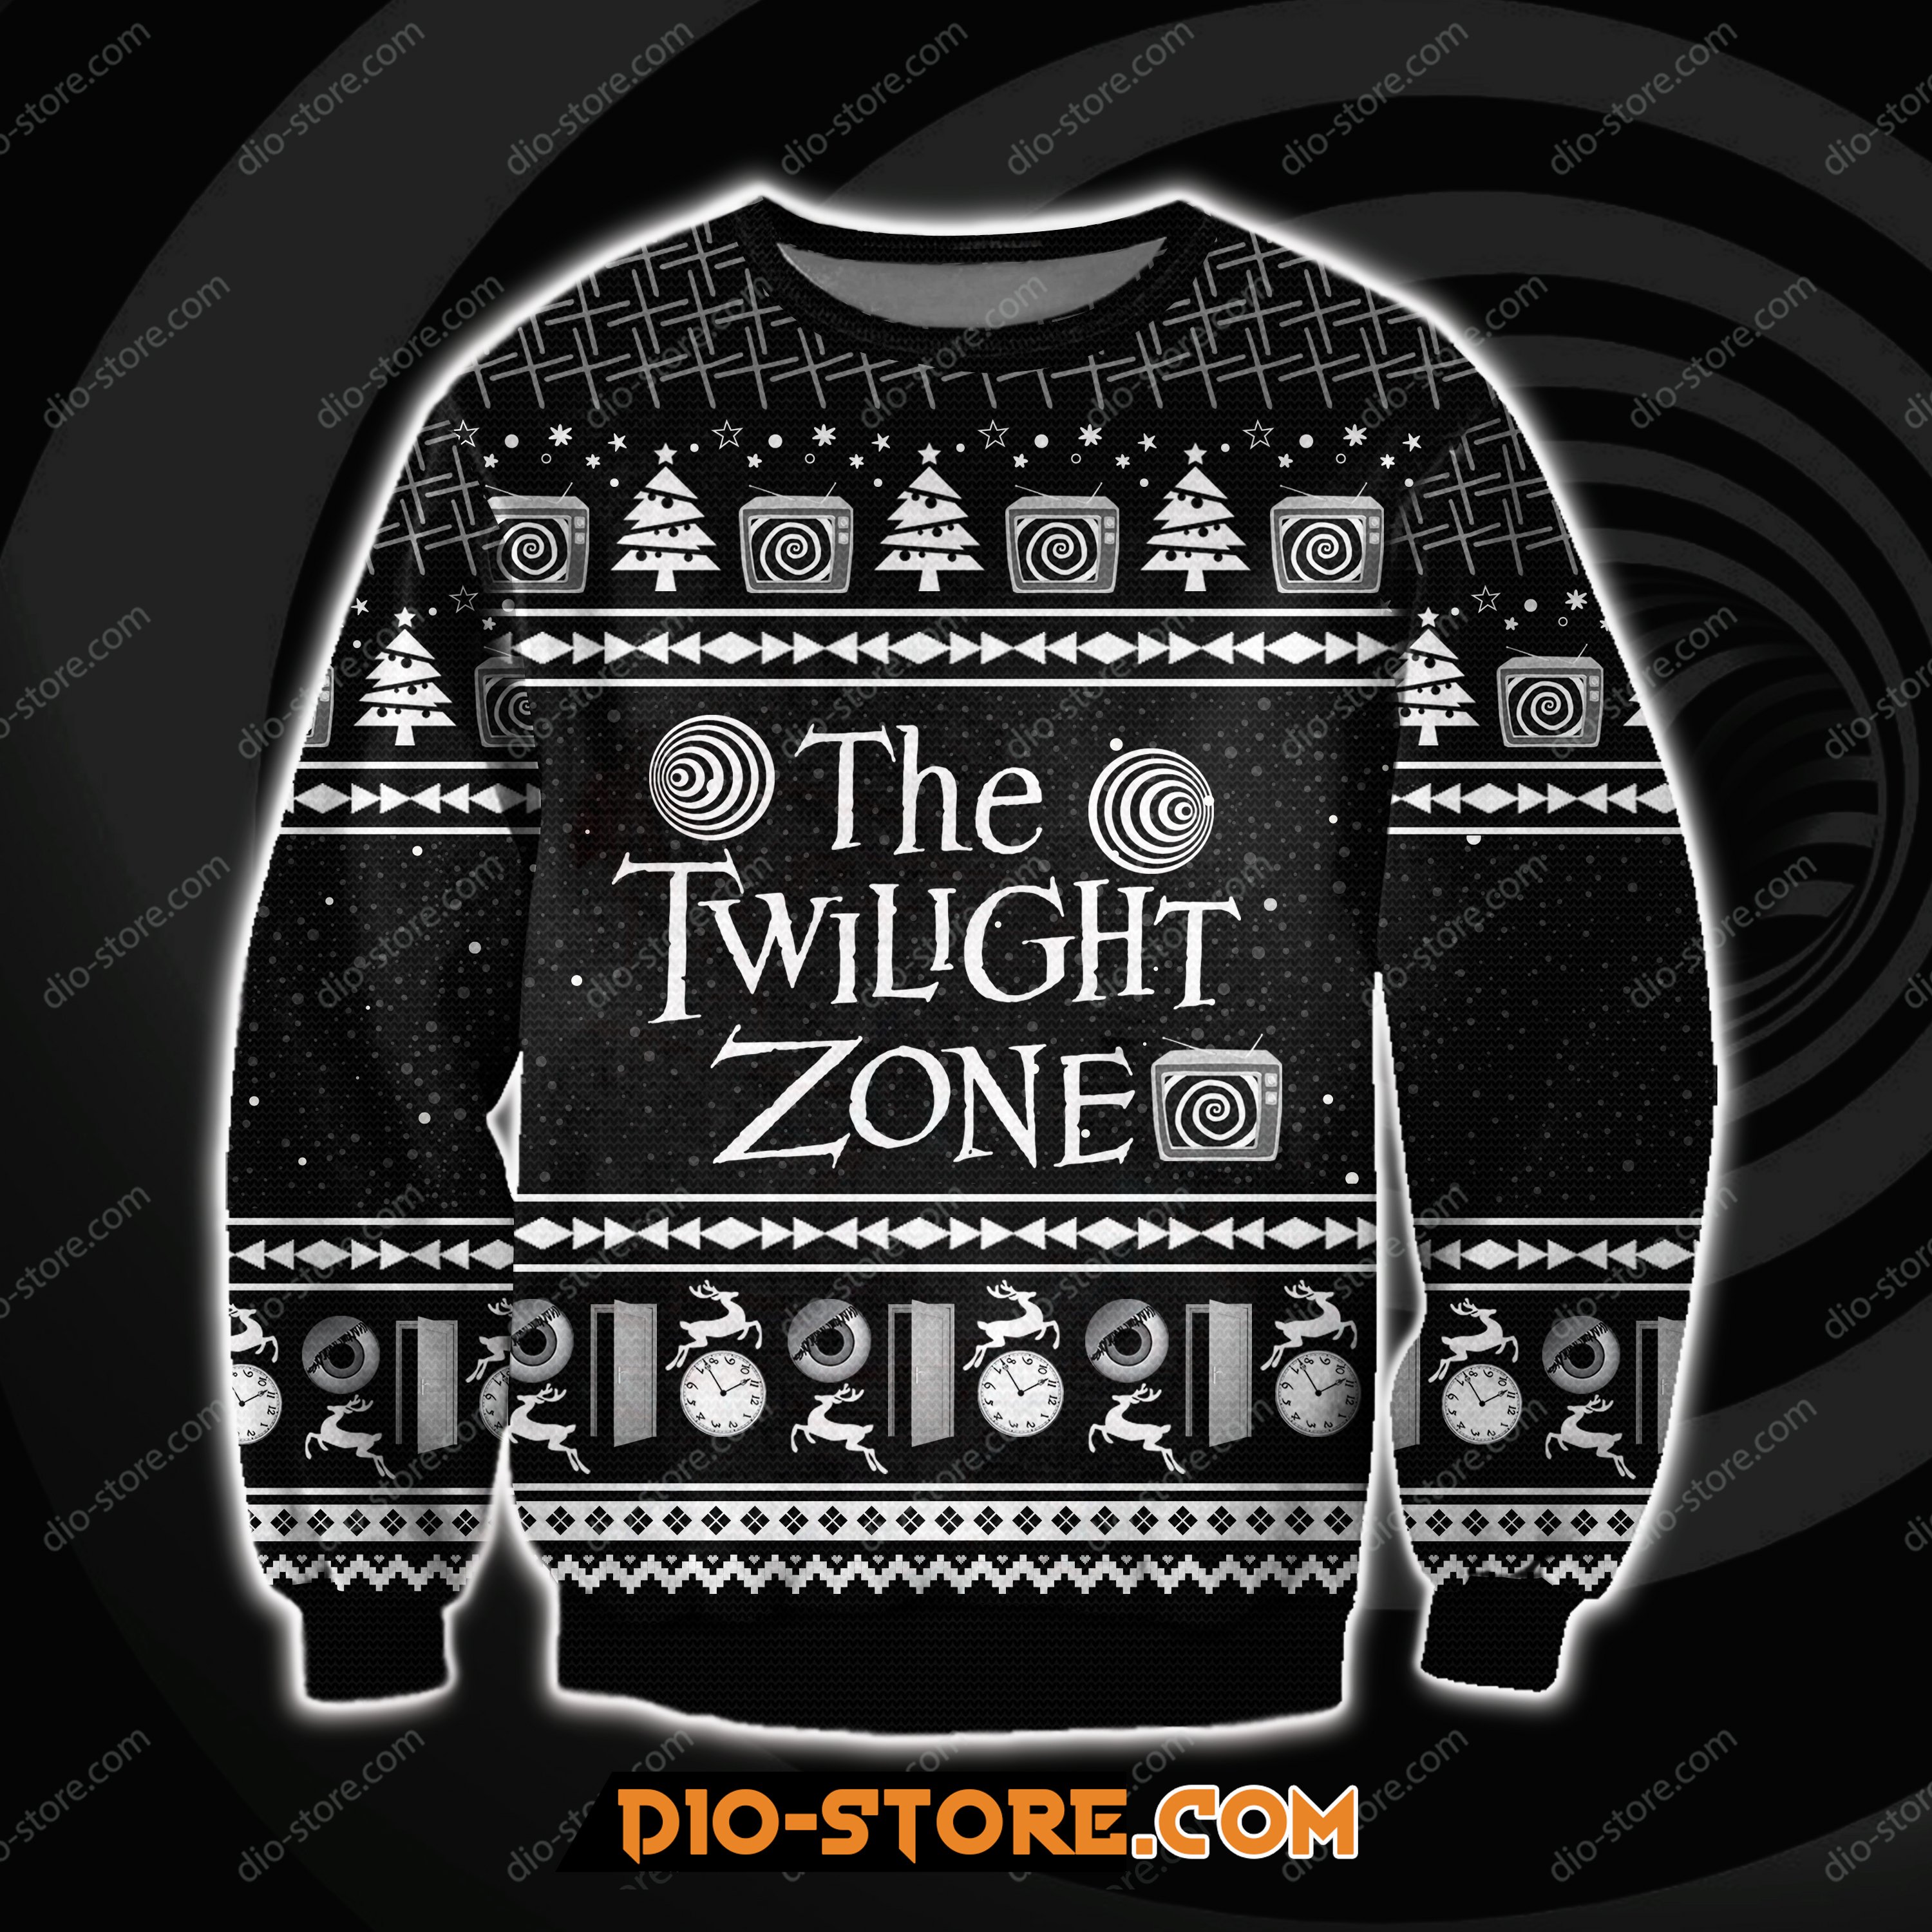 The Twilight Zone 3D Print Ugly Christmas Sweatshirt Hoodie All Over Printed Cint10045